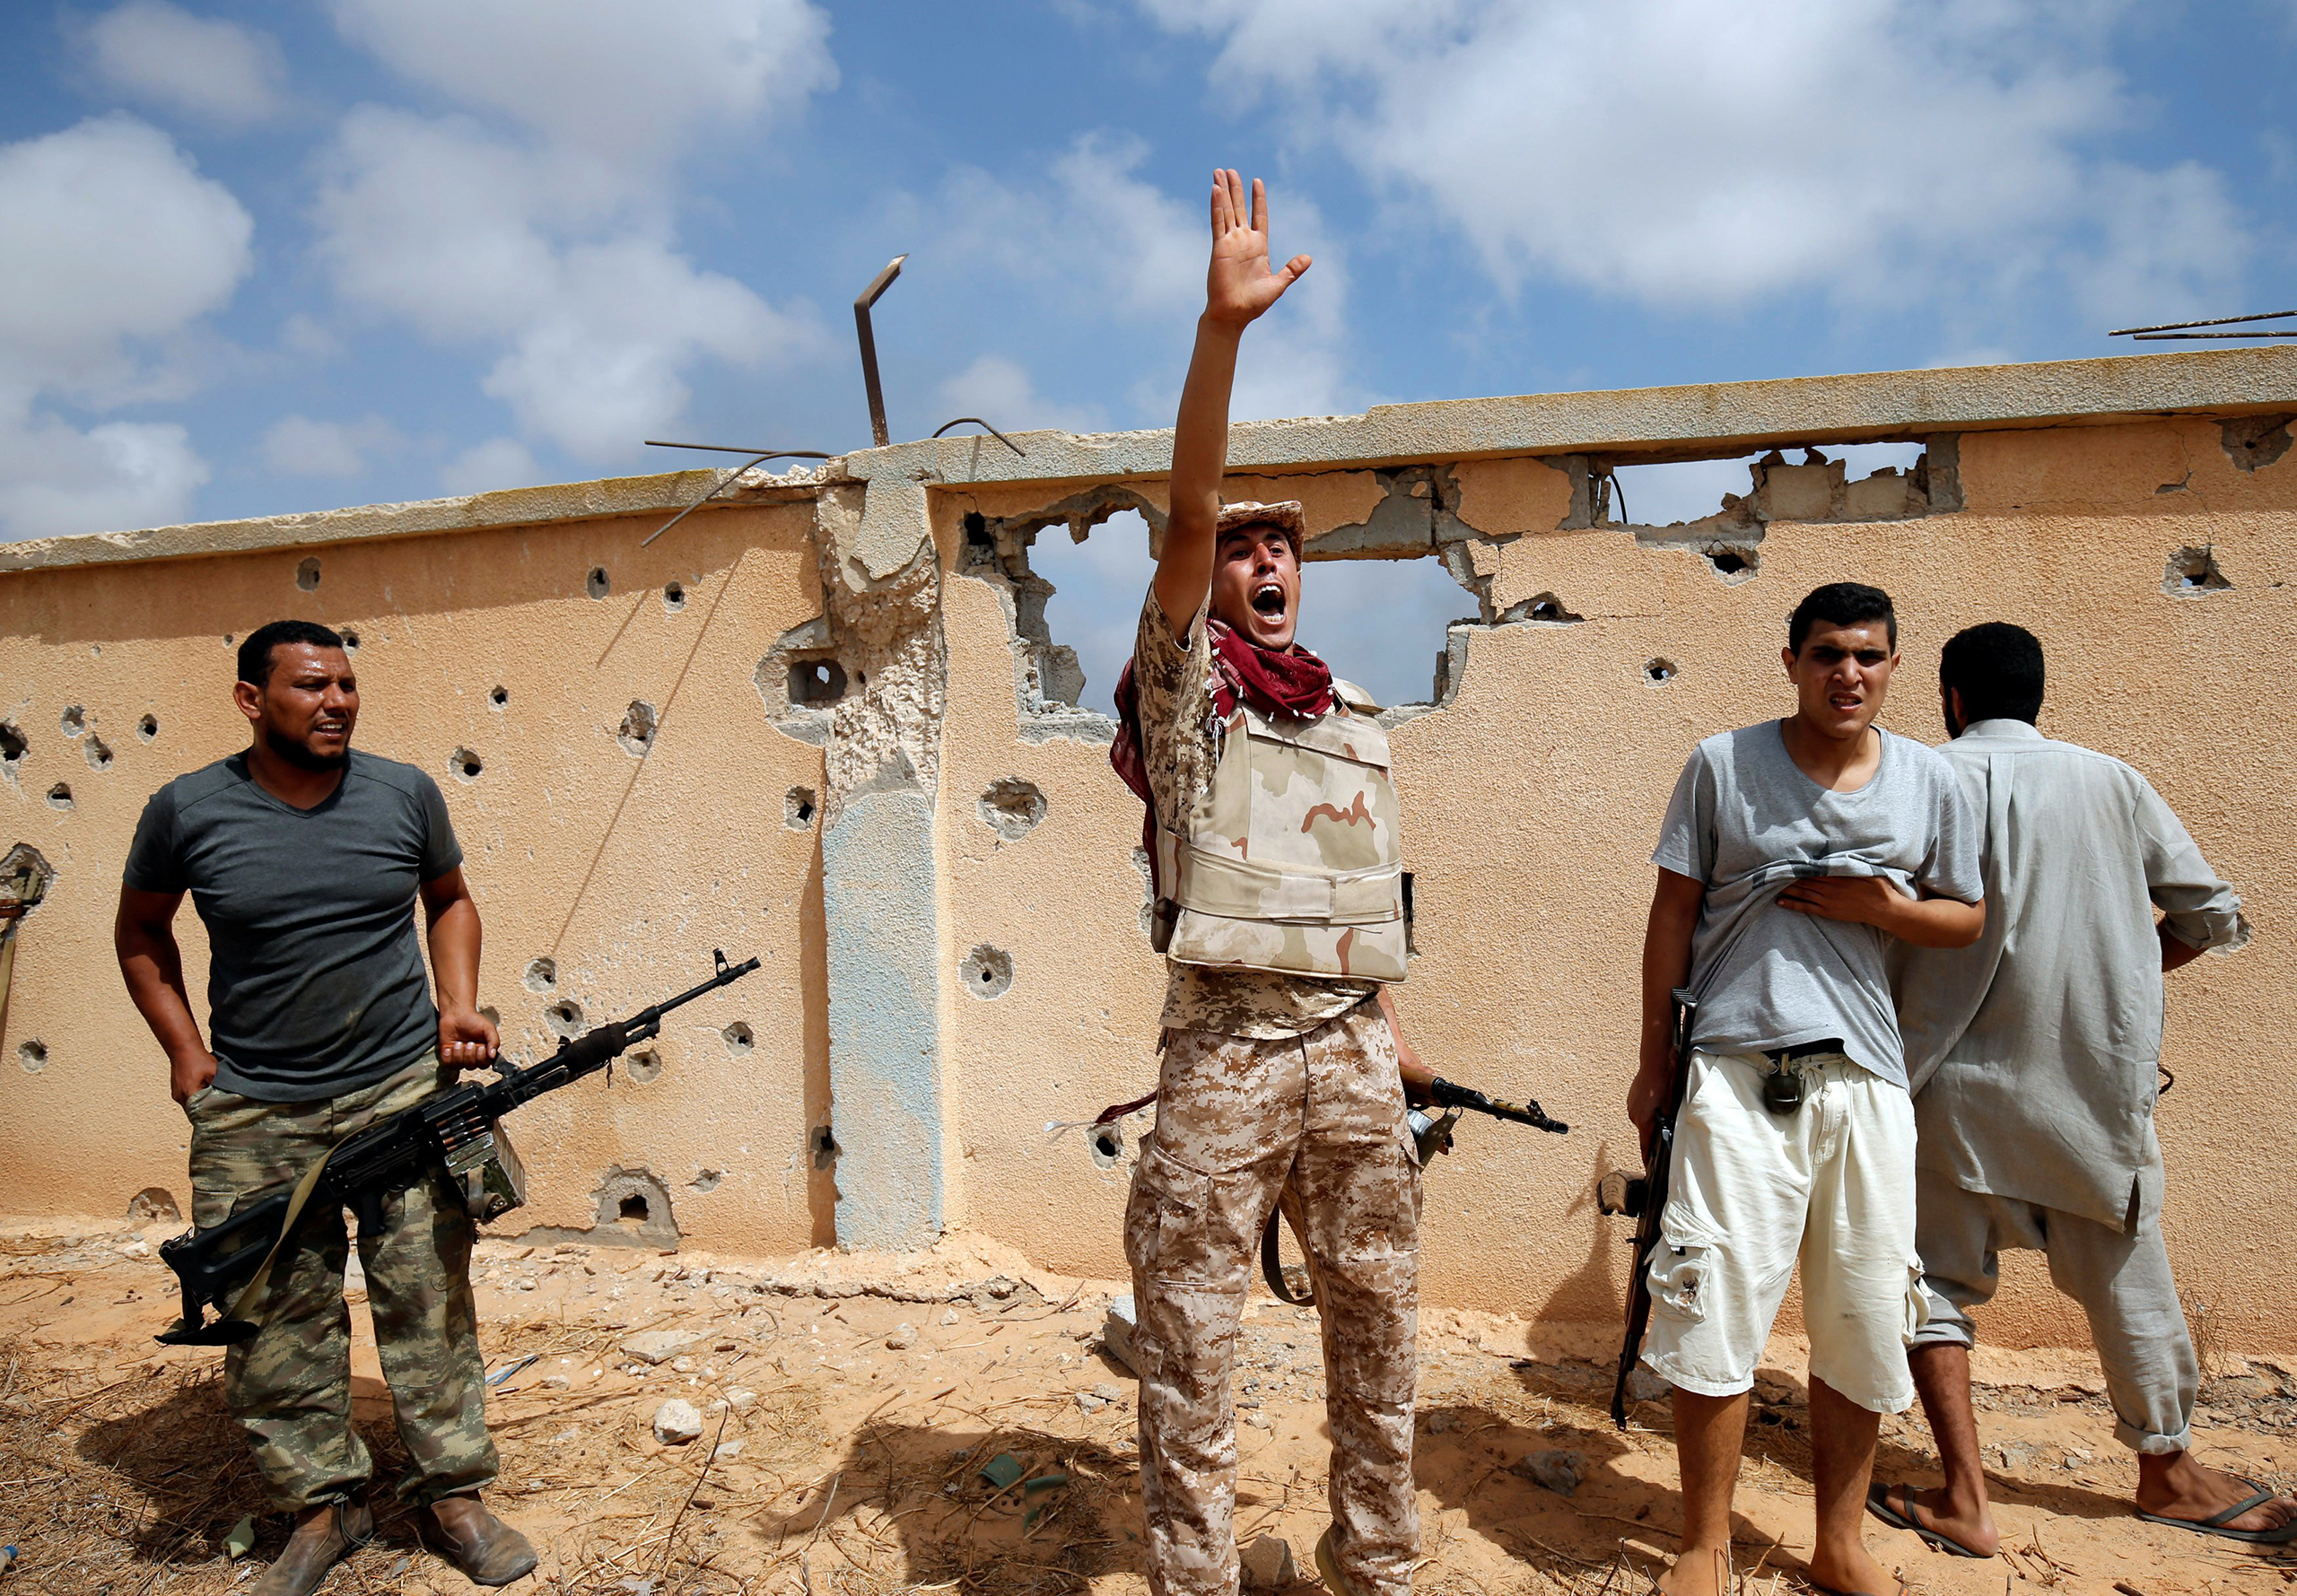 A member of Libyan forces allied with the U.N.-backed unity government gestures during a battle against ISIS in Sirt, Libya, on July 15, 2016.